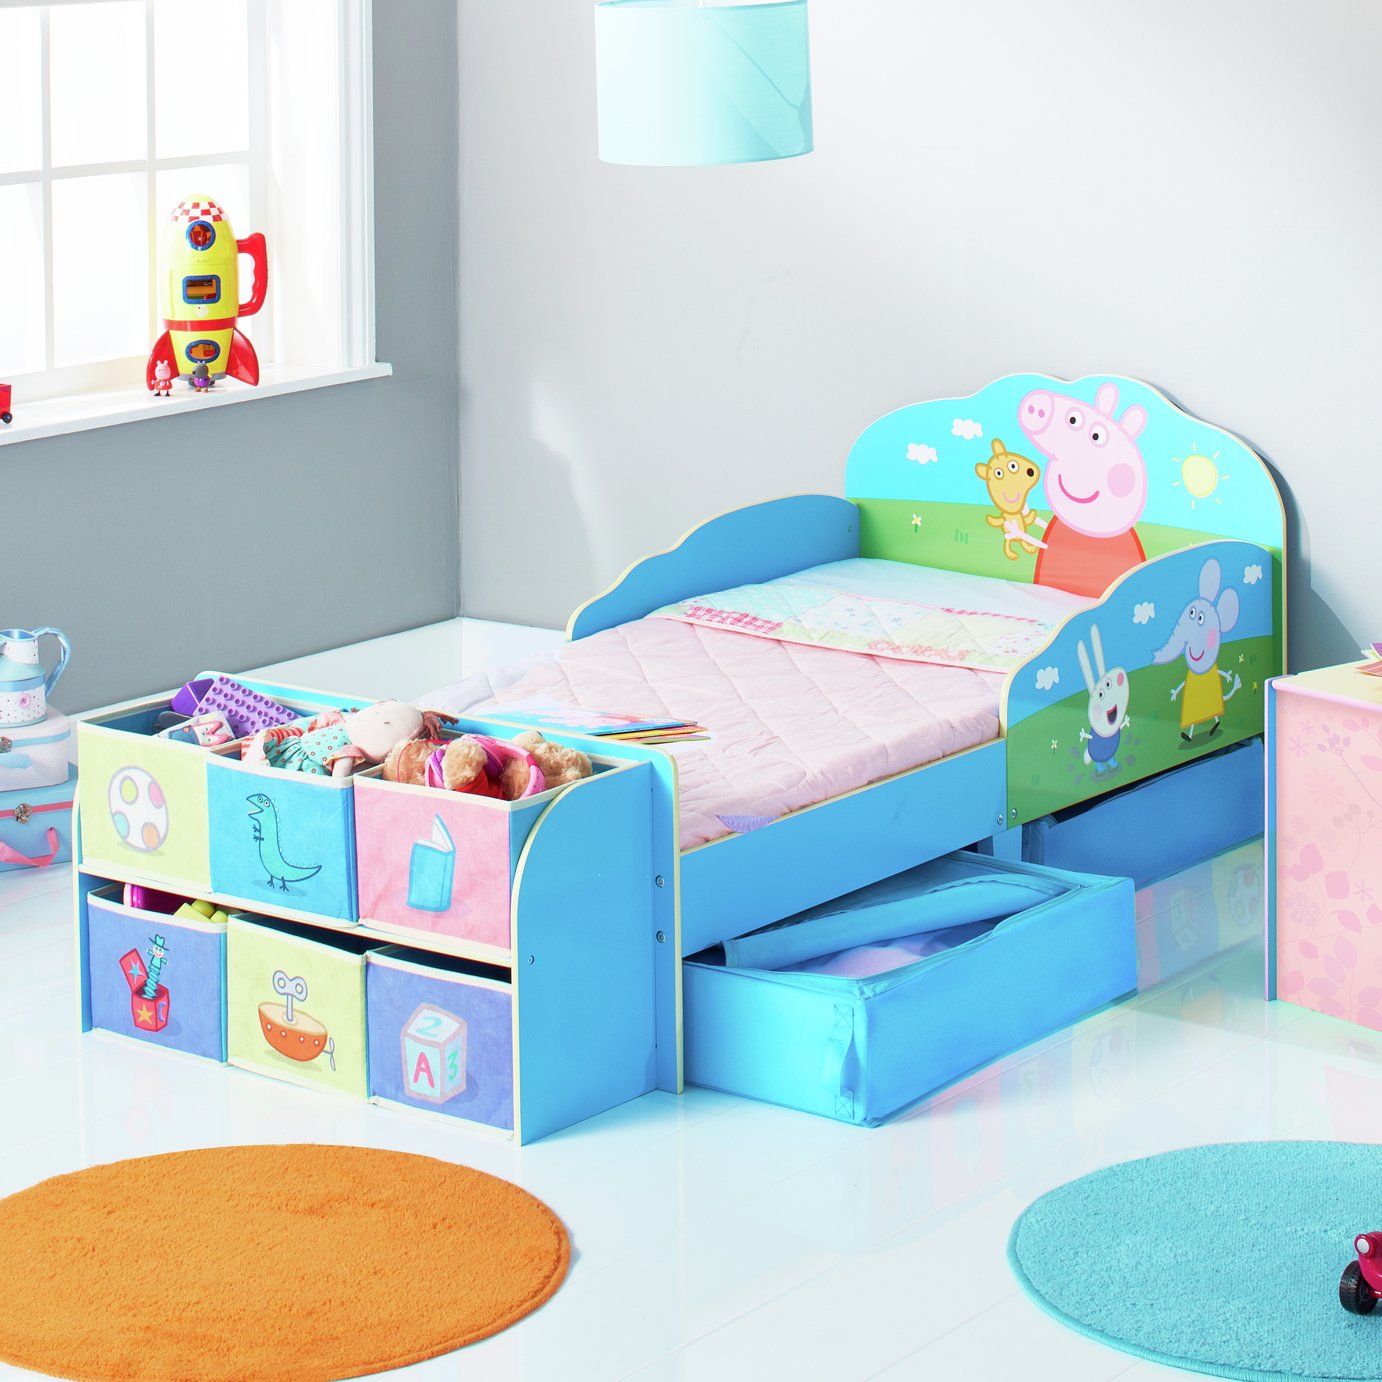 Peppa Pig Toddler Bed with Cube Storage Review